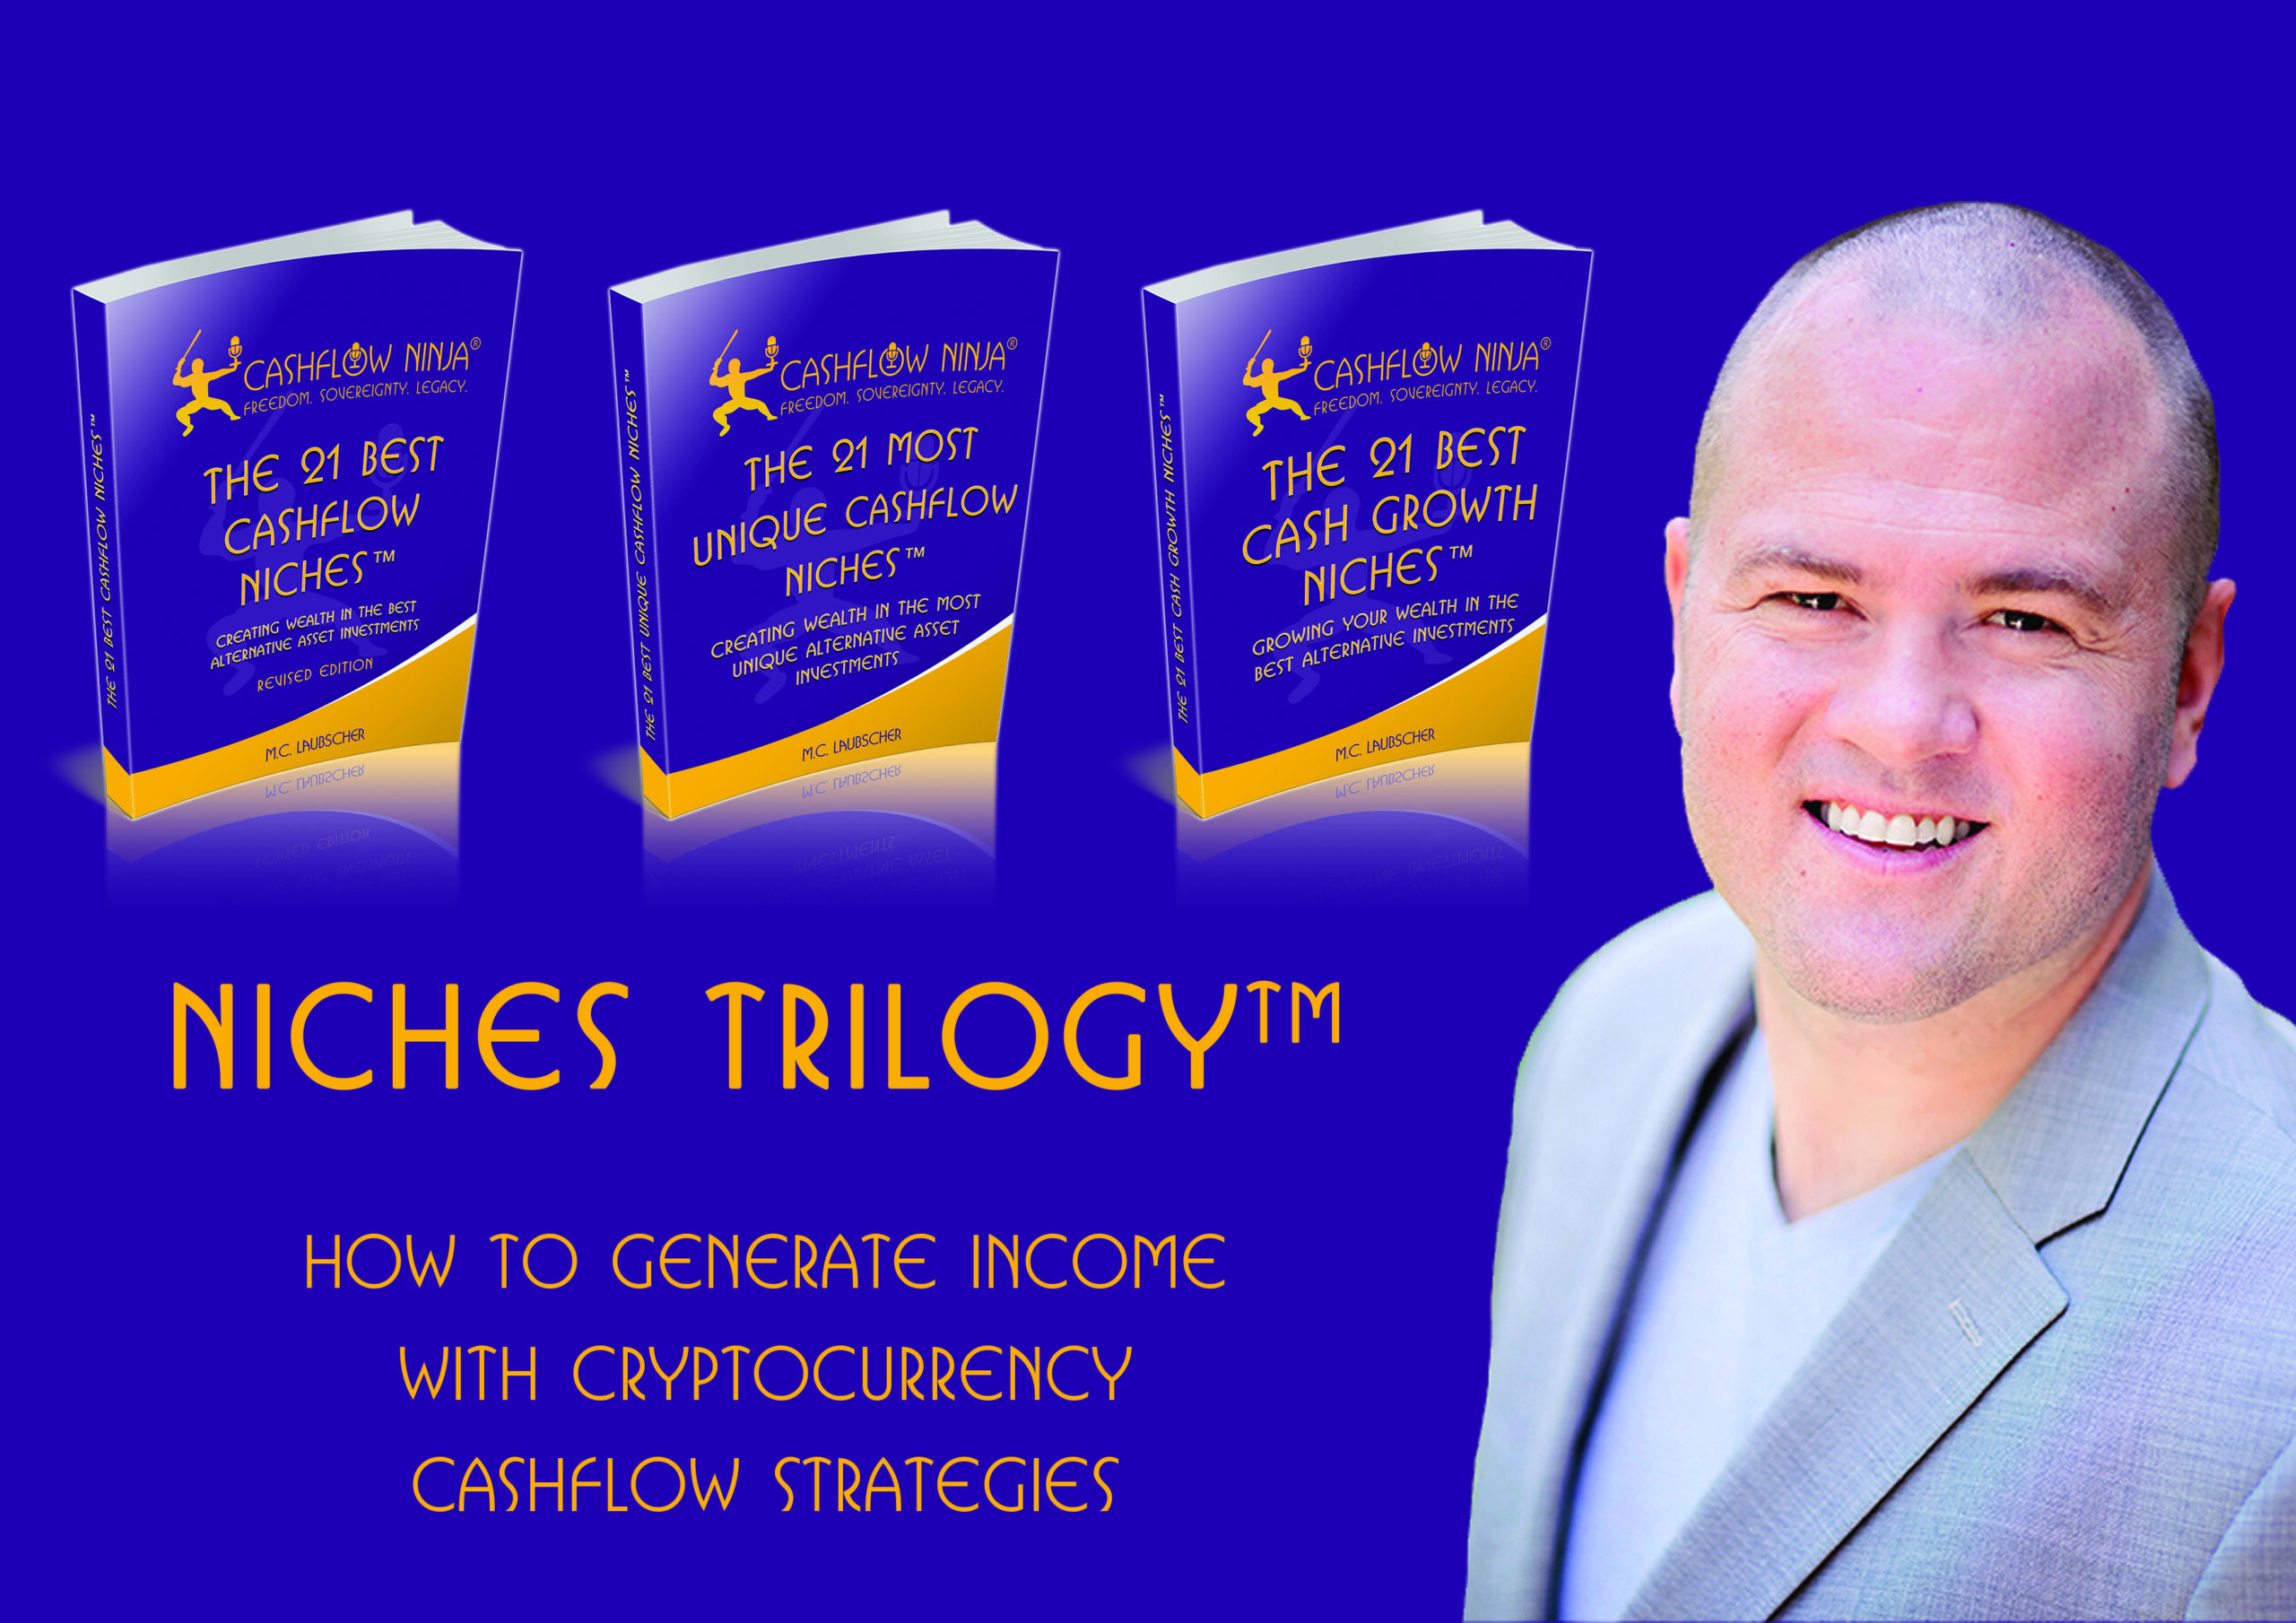 How To Generate Income With Cryptocurrency Cashflow Strategies